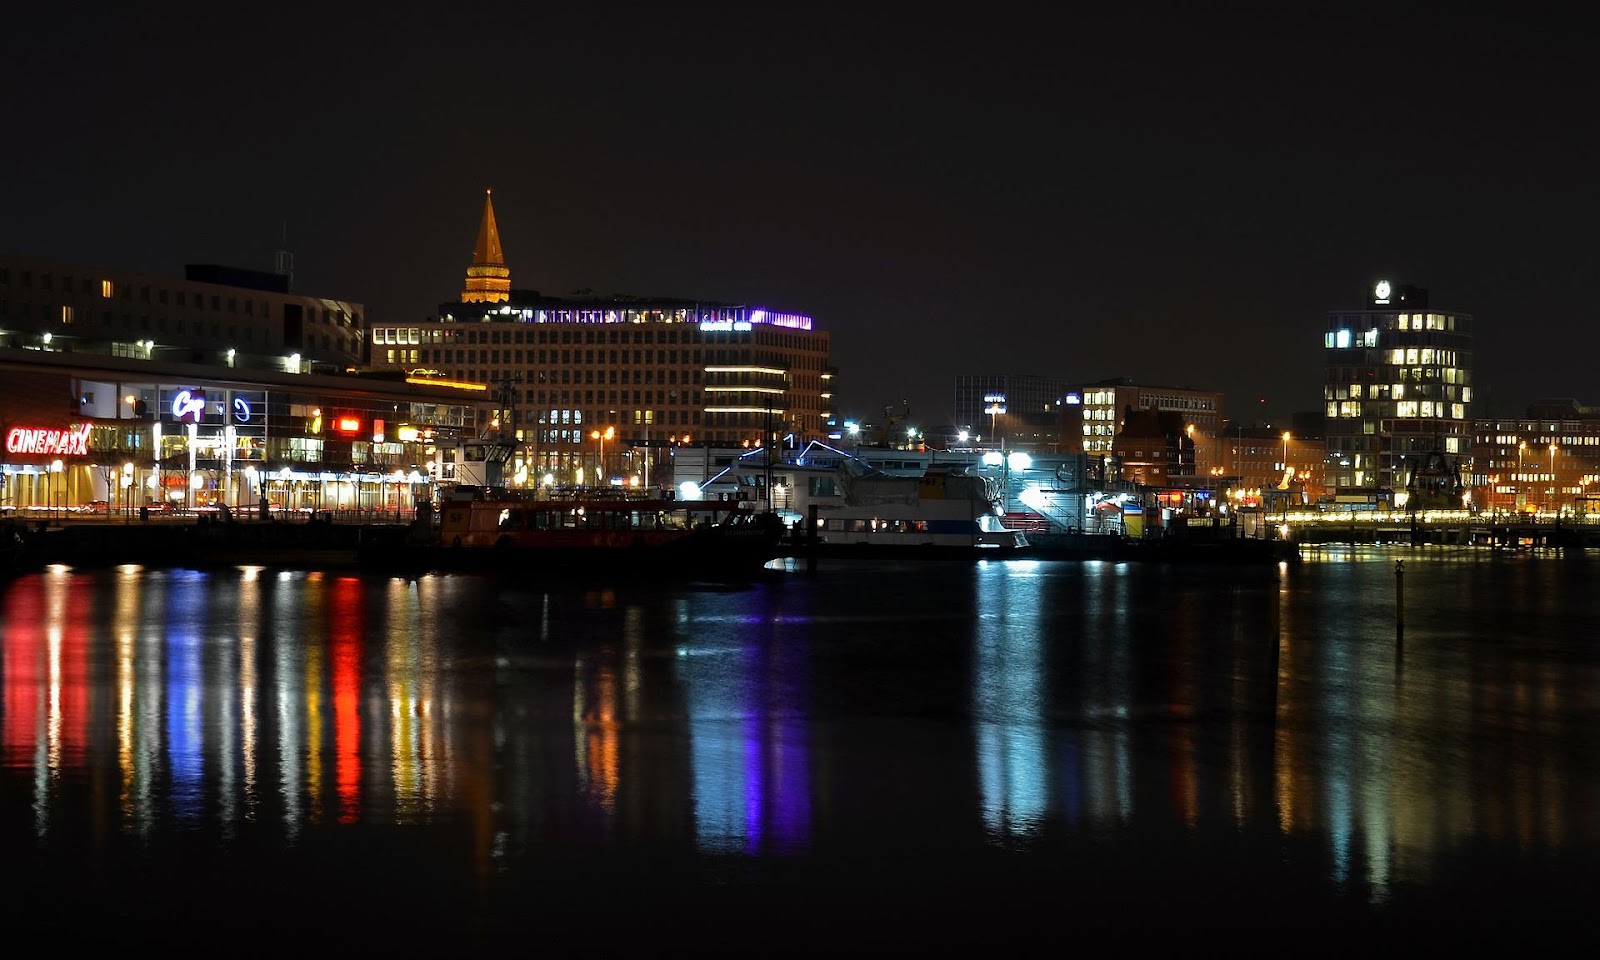 A picture containing water, river, night, city

Description automatically generated